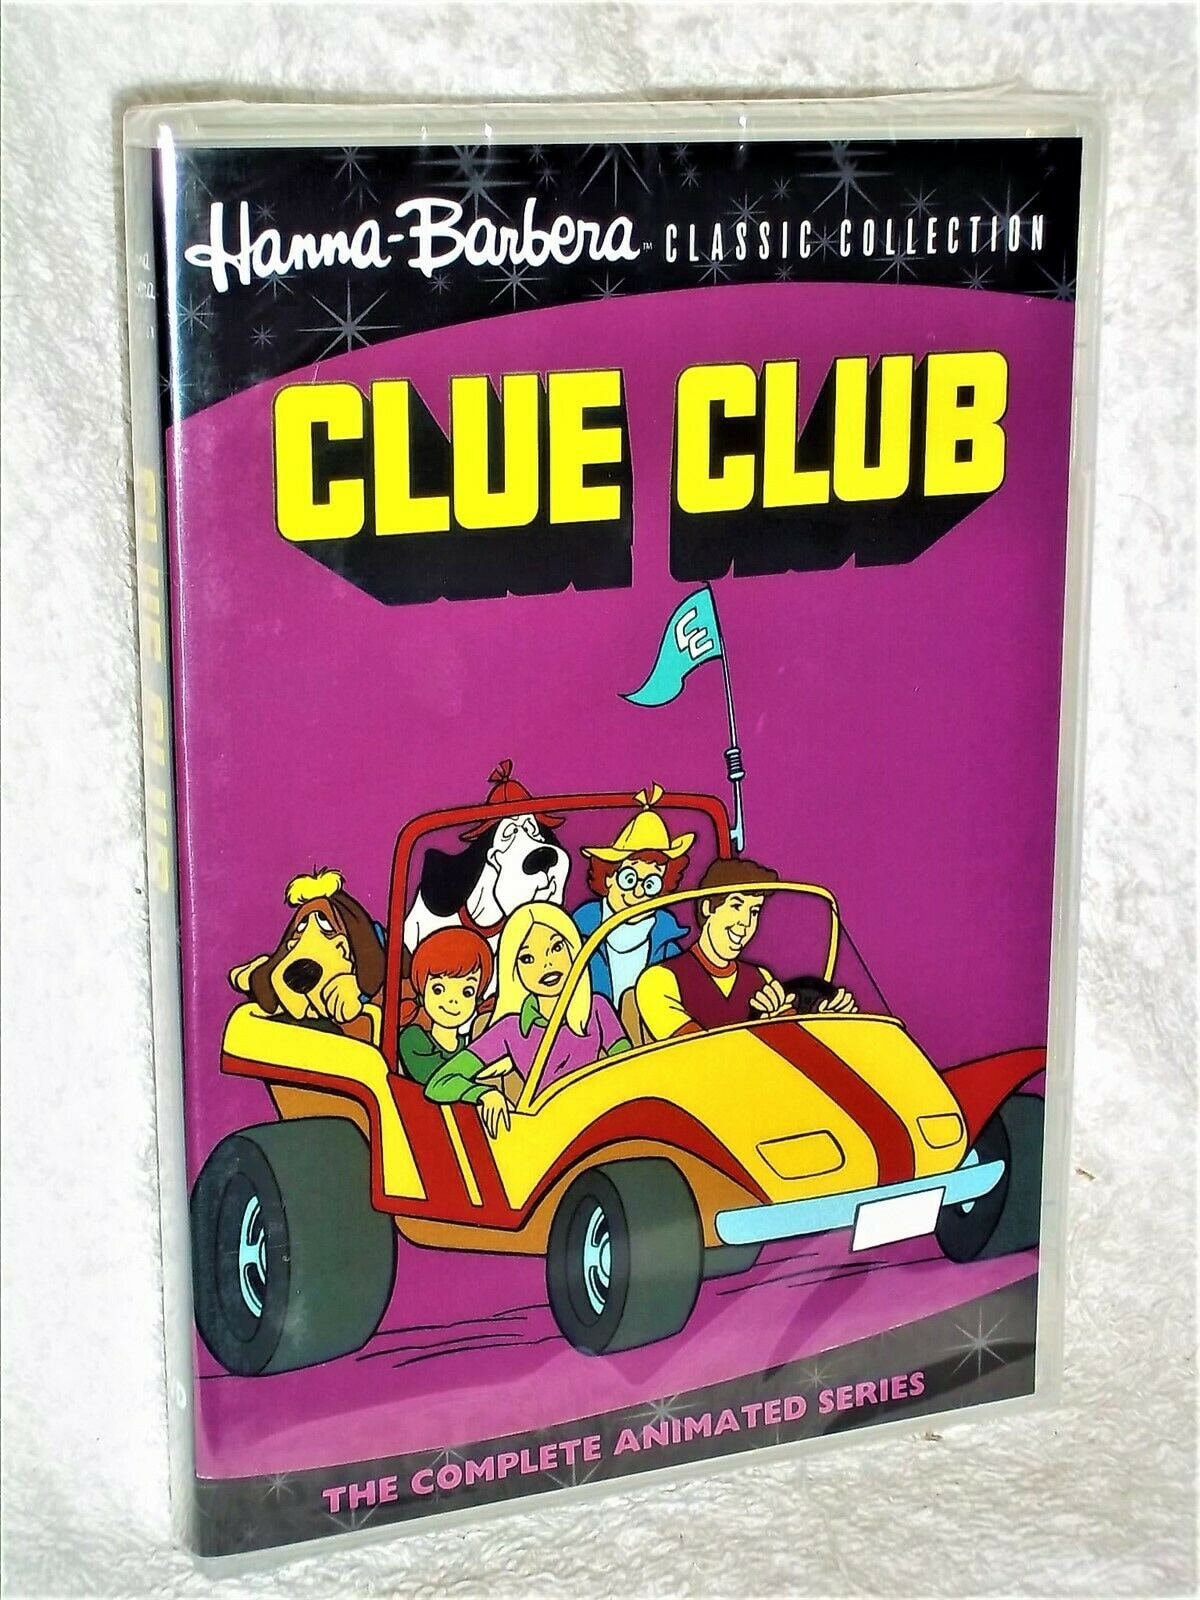 Clue Club: the Complete Animated Series DVD New & Sealed - Etsy